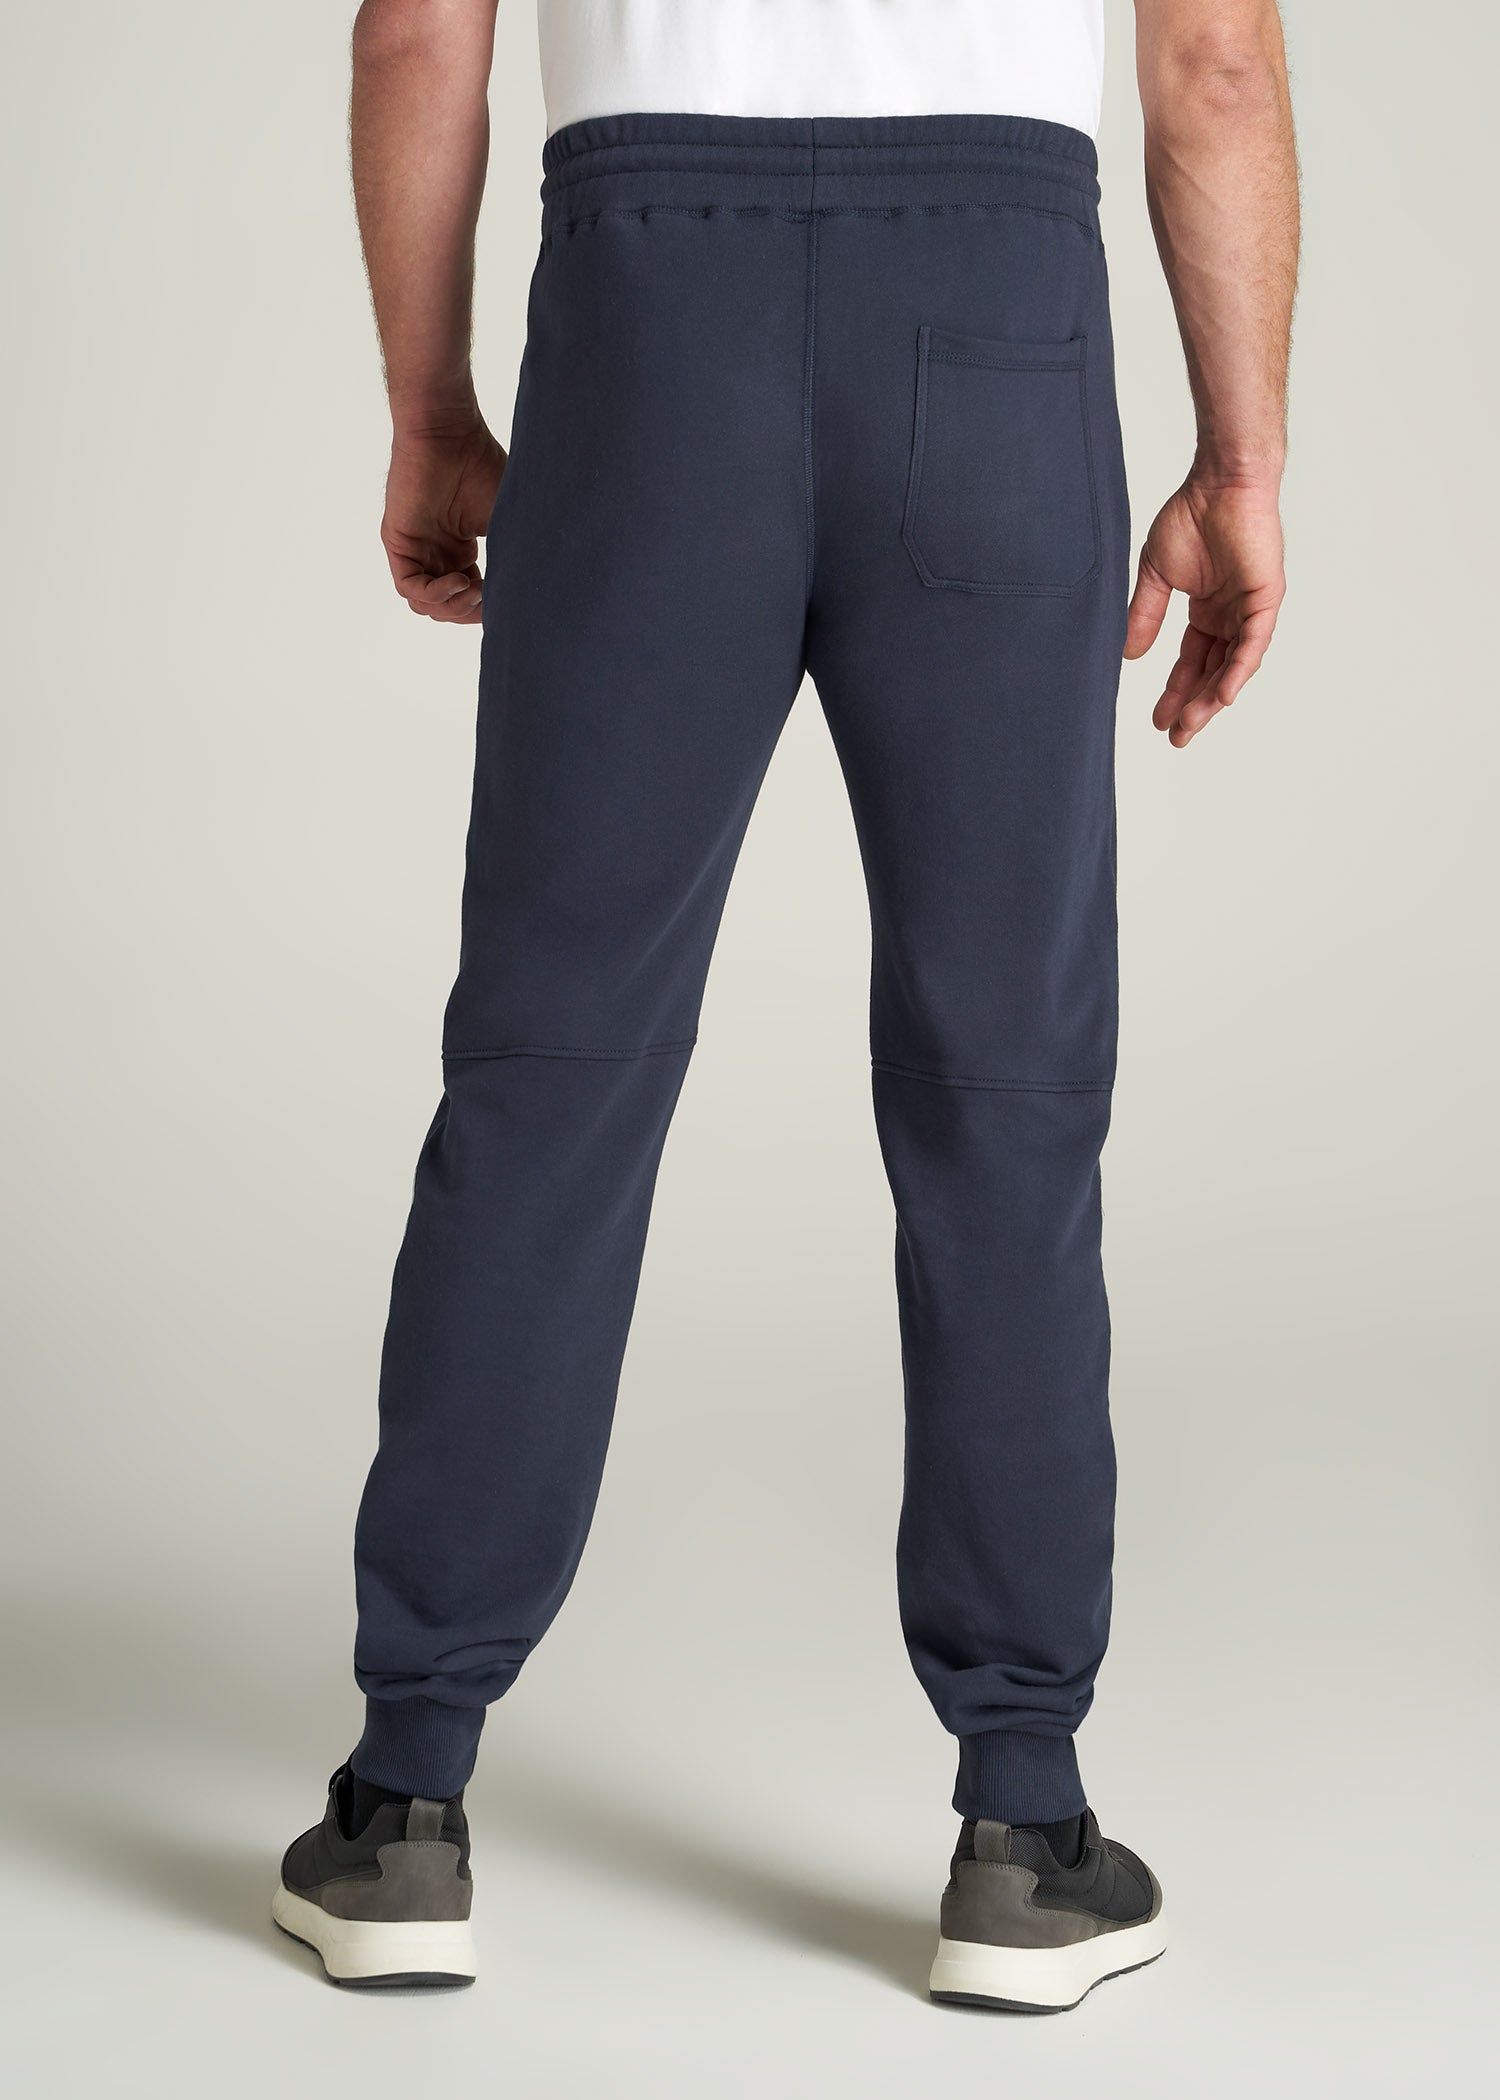 Wearever French Terry Men's Tall Joggers in Navy